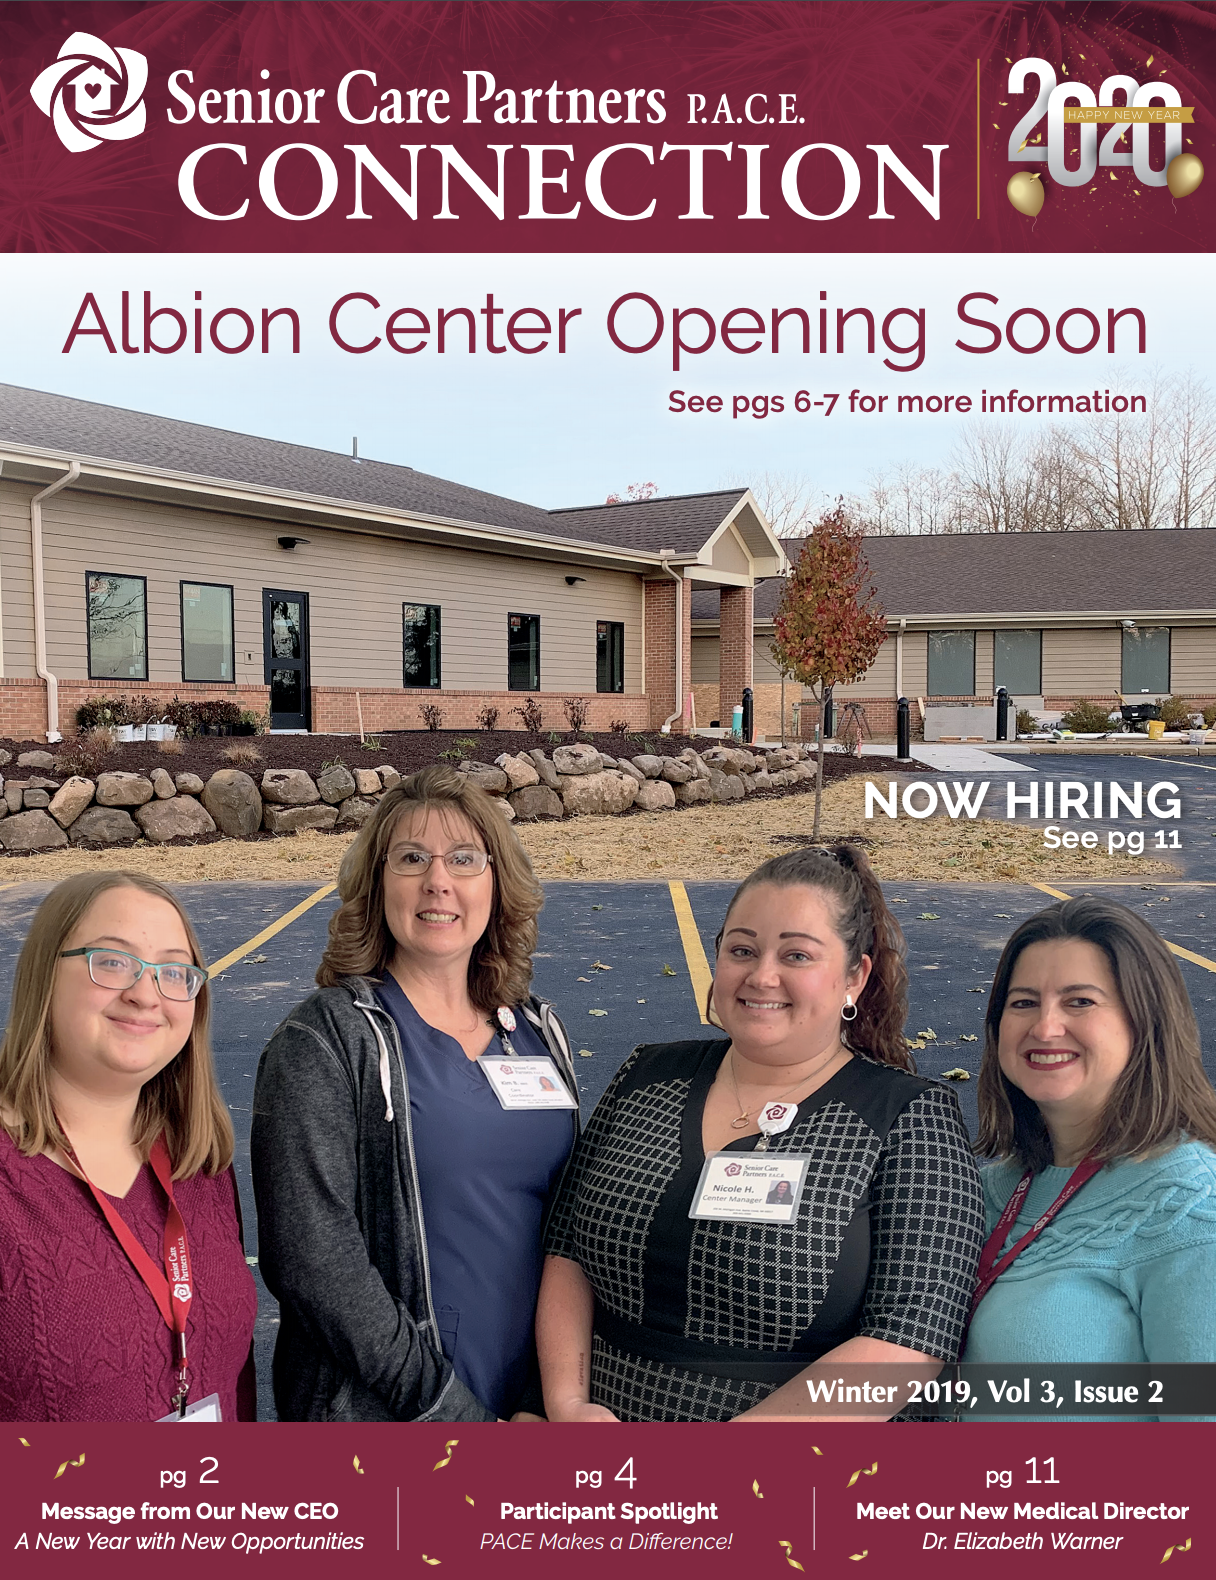 Our Albion Center to Open Soon